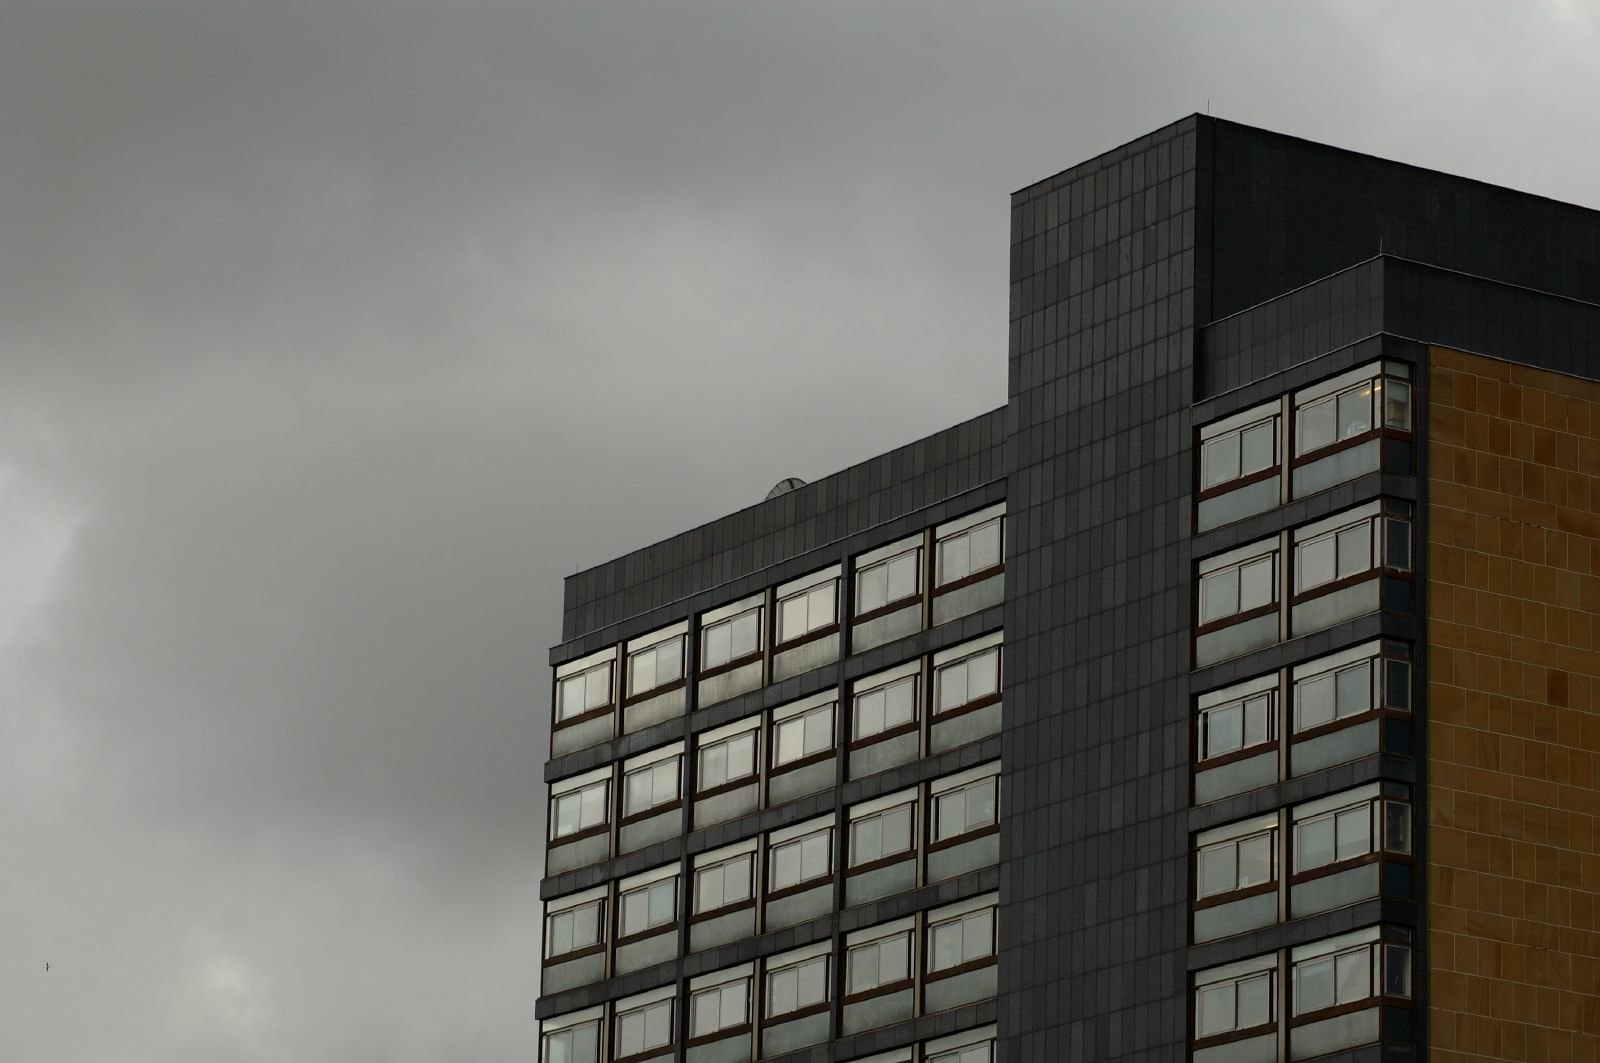 40 George Square, a 1960s teaching building, against a gray sky.